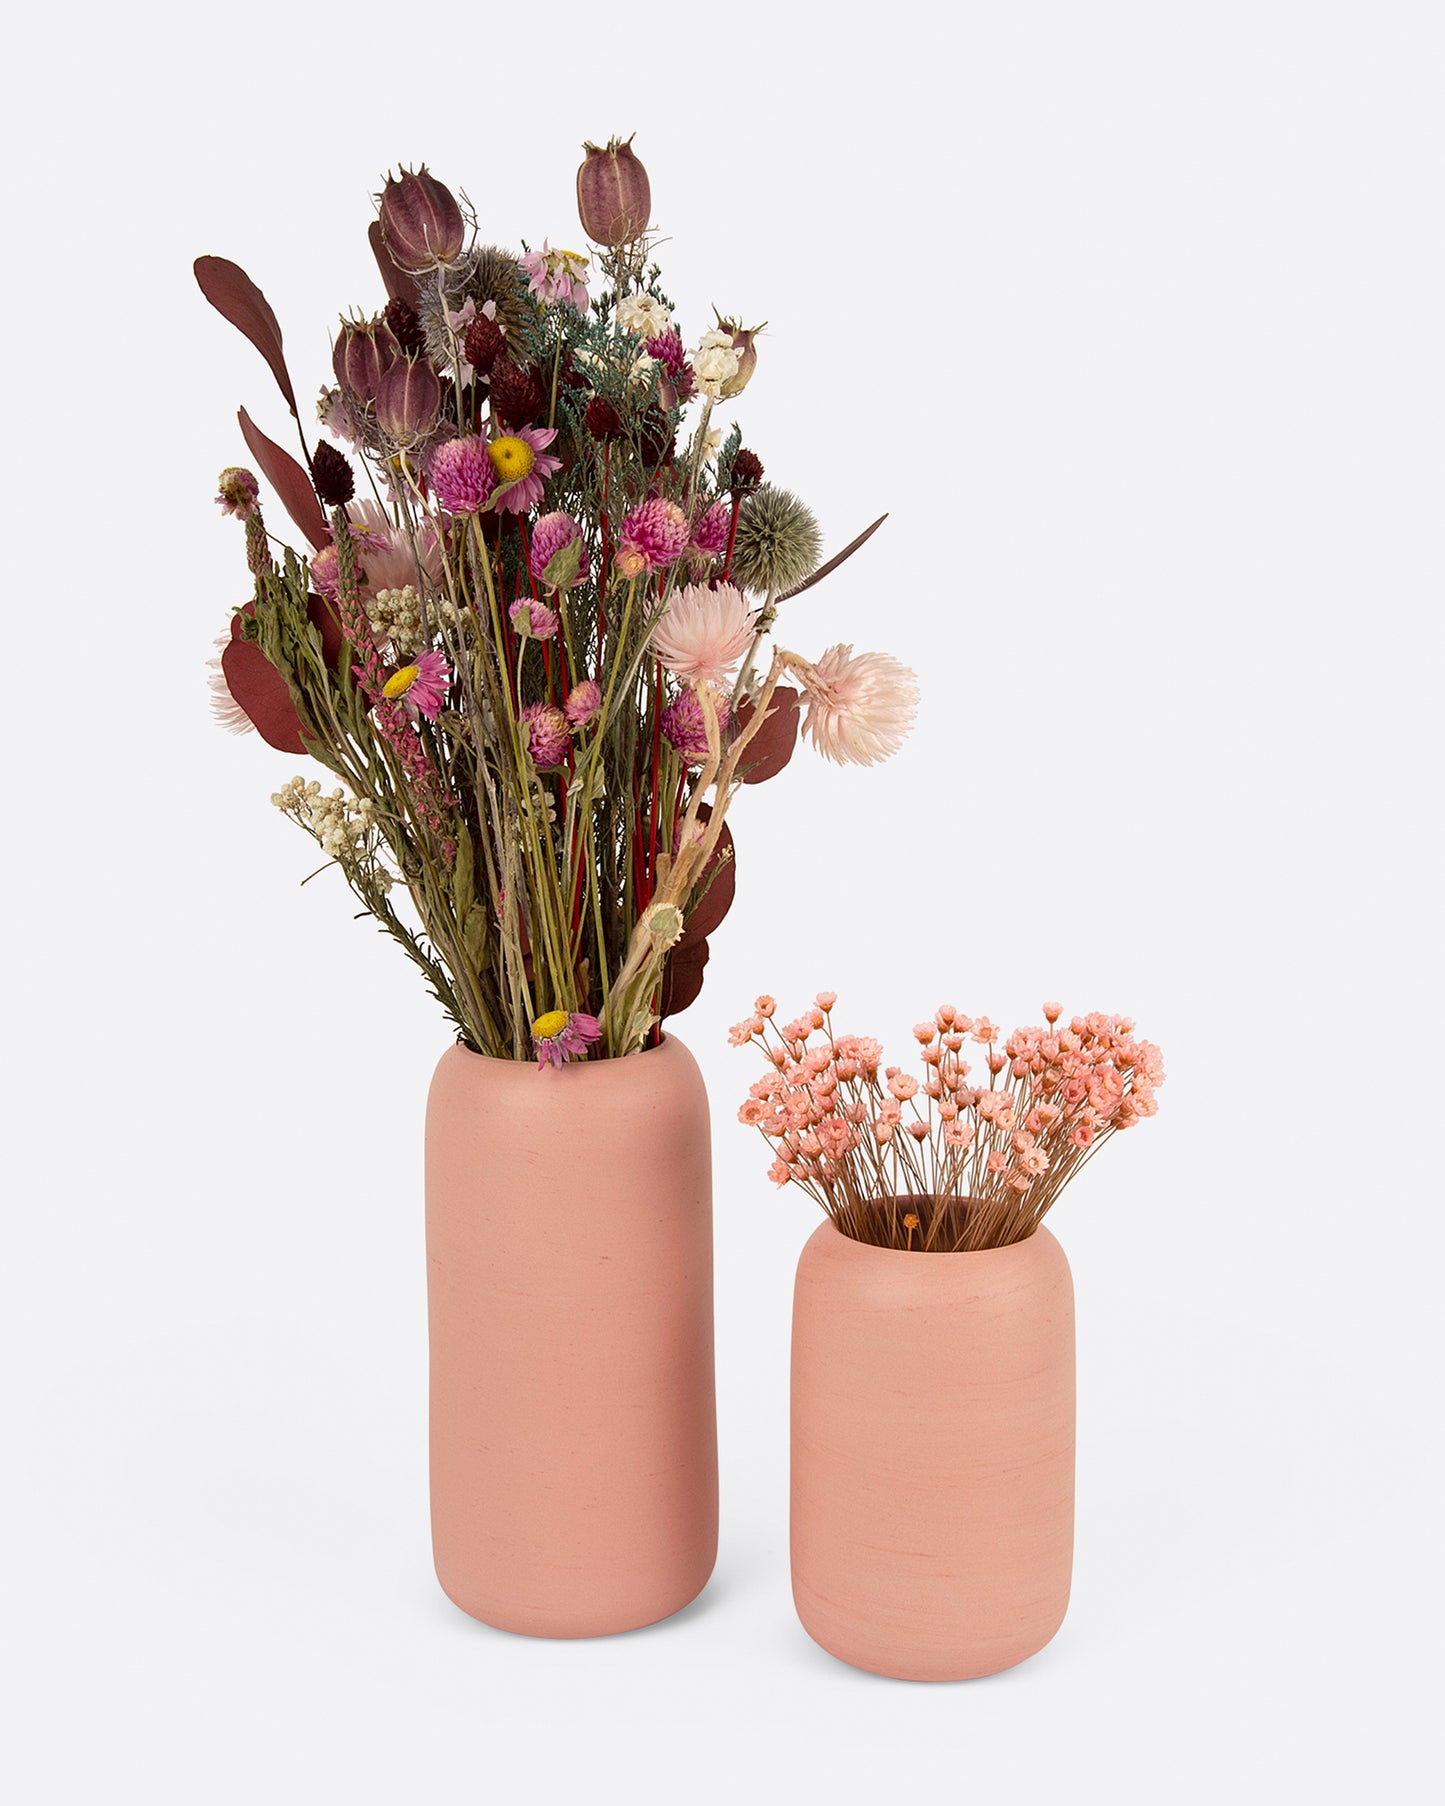 Two pink porcelain vases with flower arrangements, one small and one large.